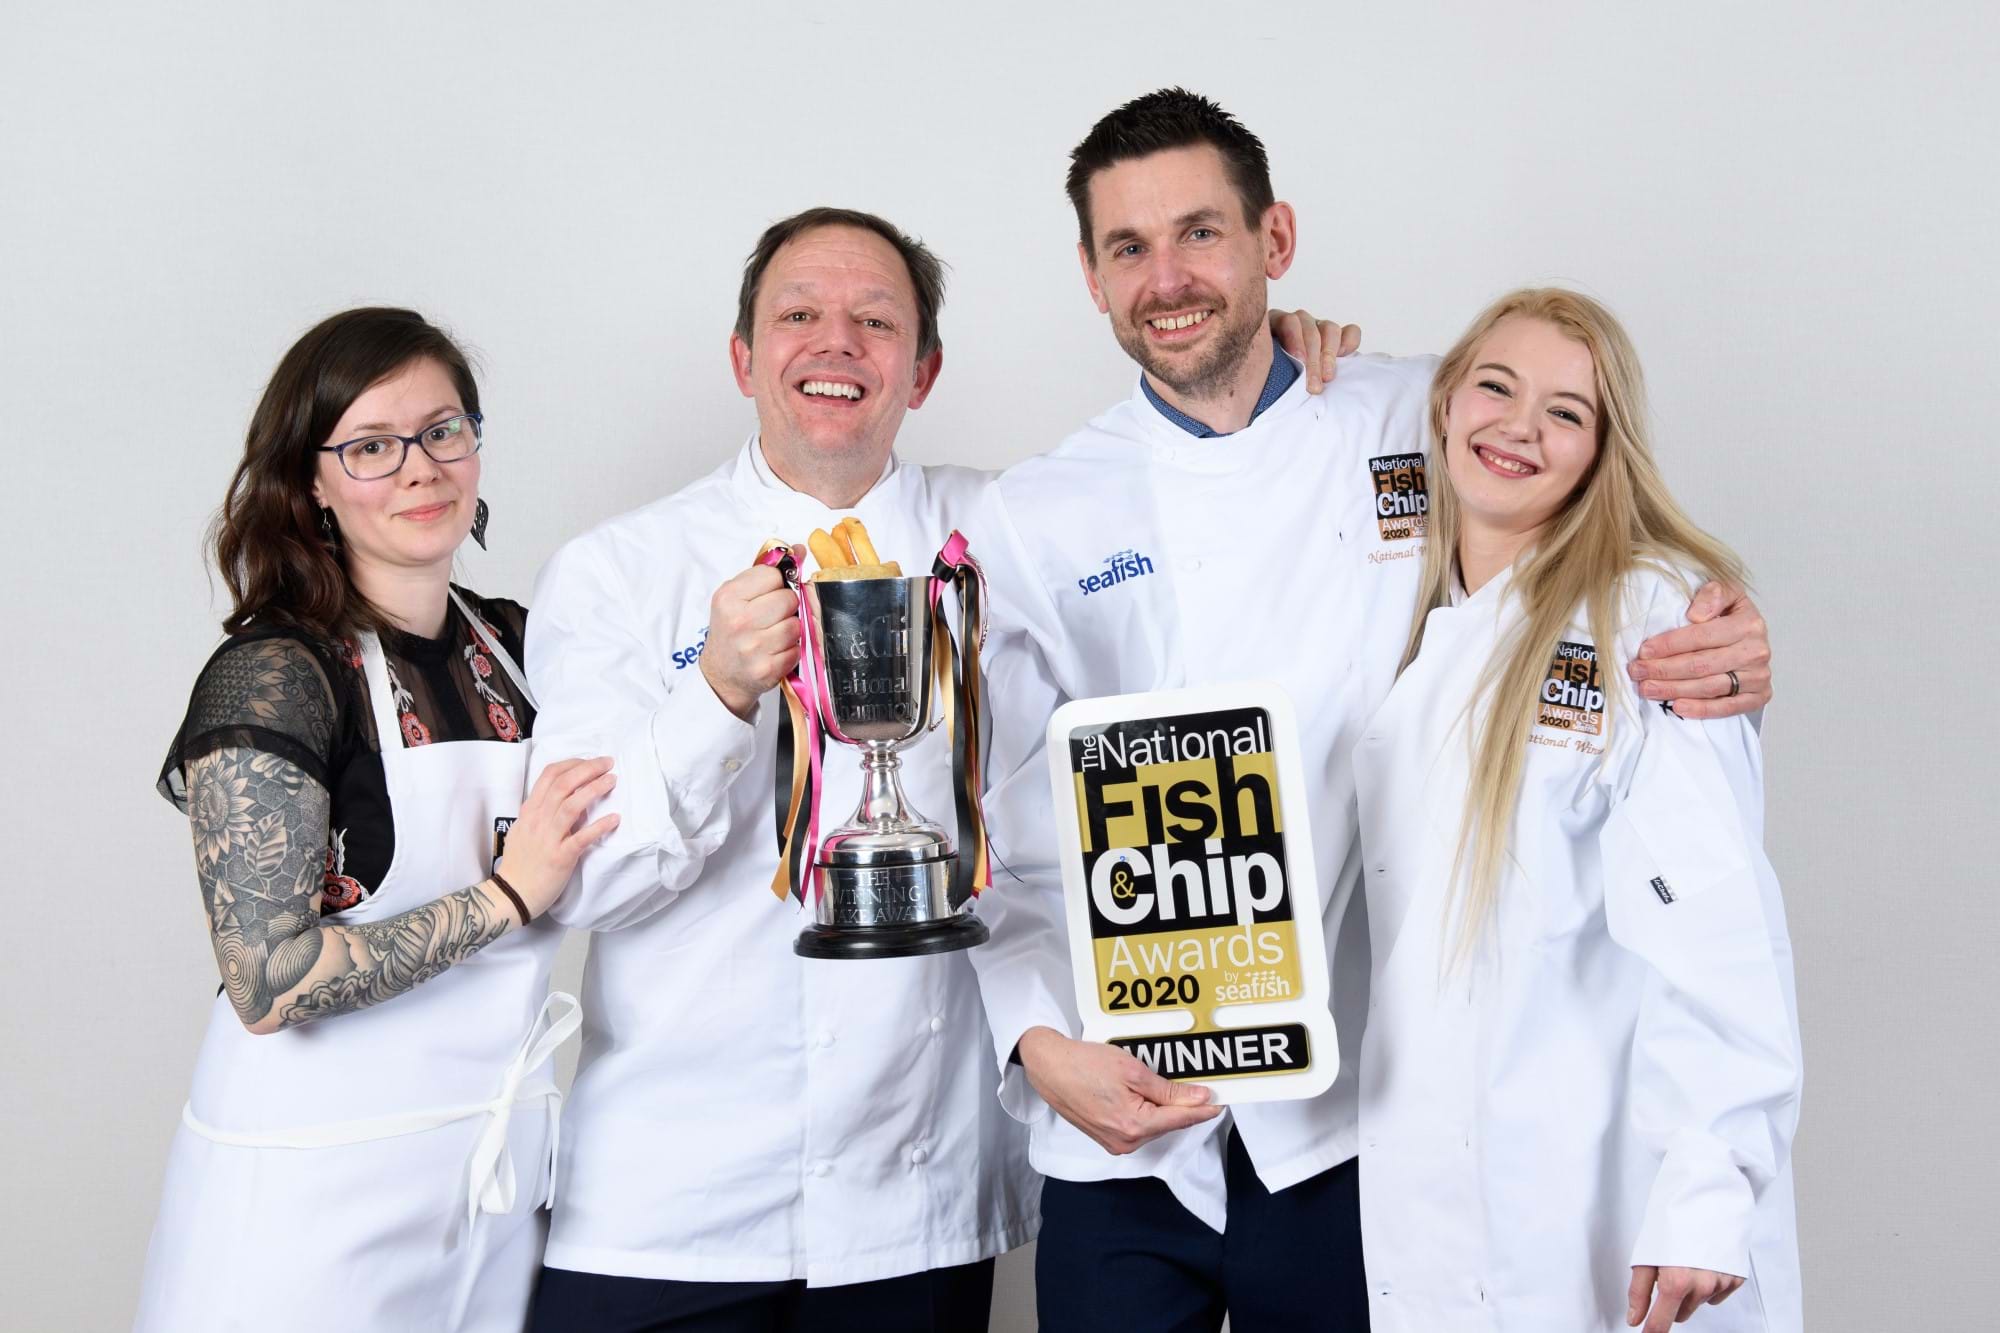 Photo of owners and staff from The Cods Scallops - winners of the 2020 National Fish & Chip Awards